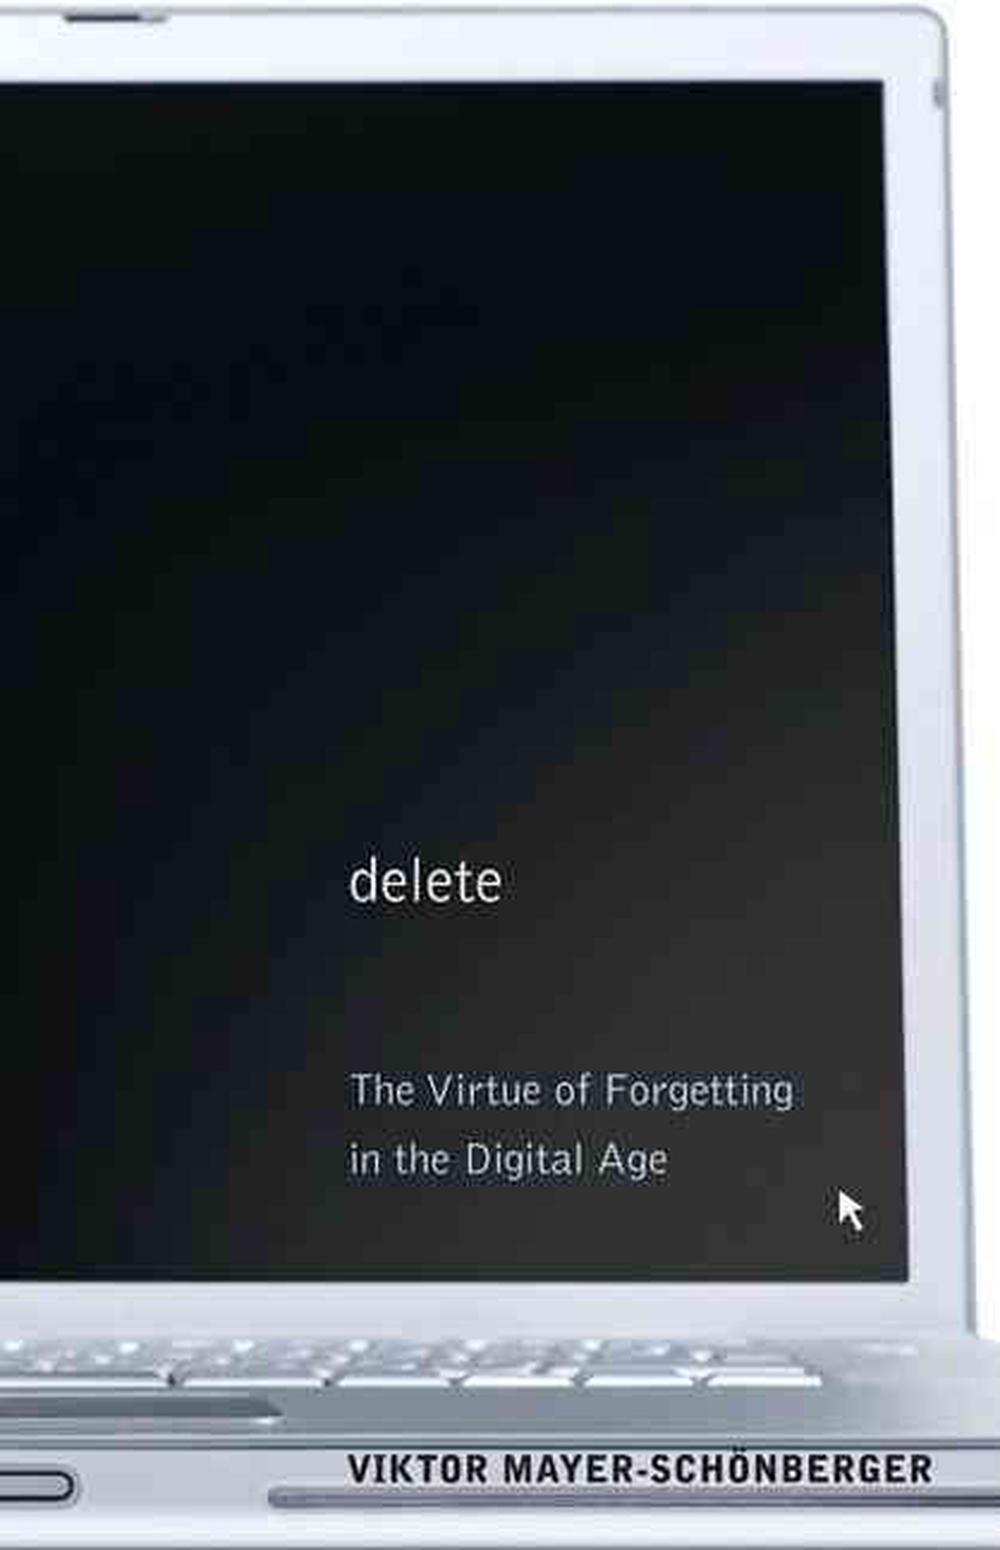 Delete The Virtue of in the Digital Age by Viktor Mayer